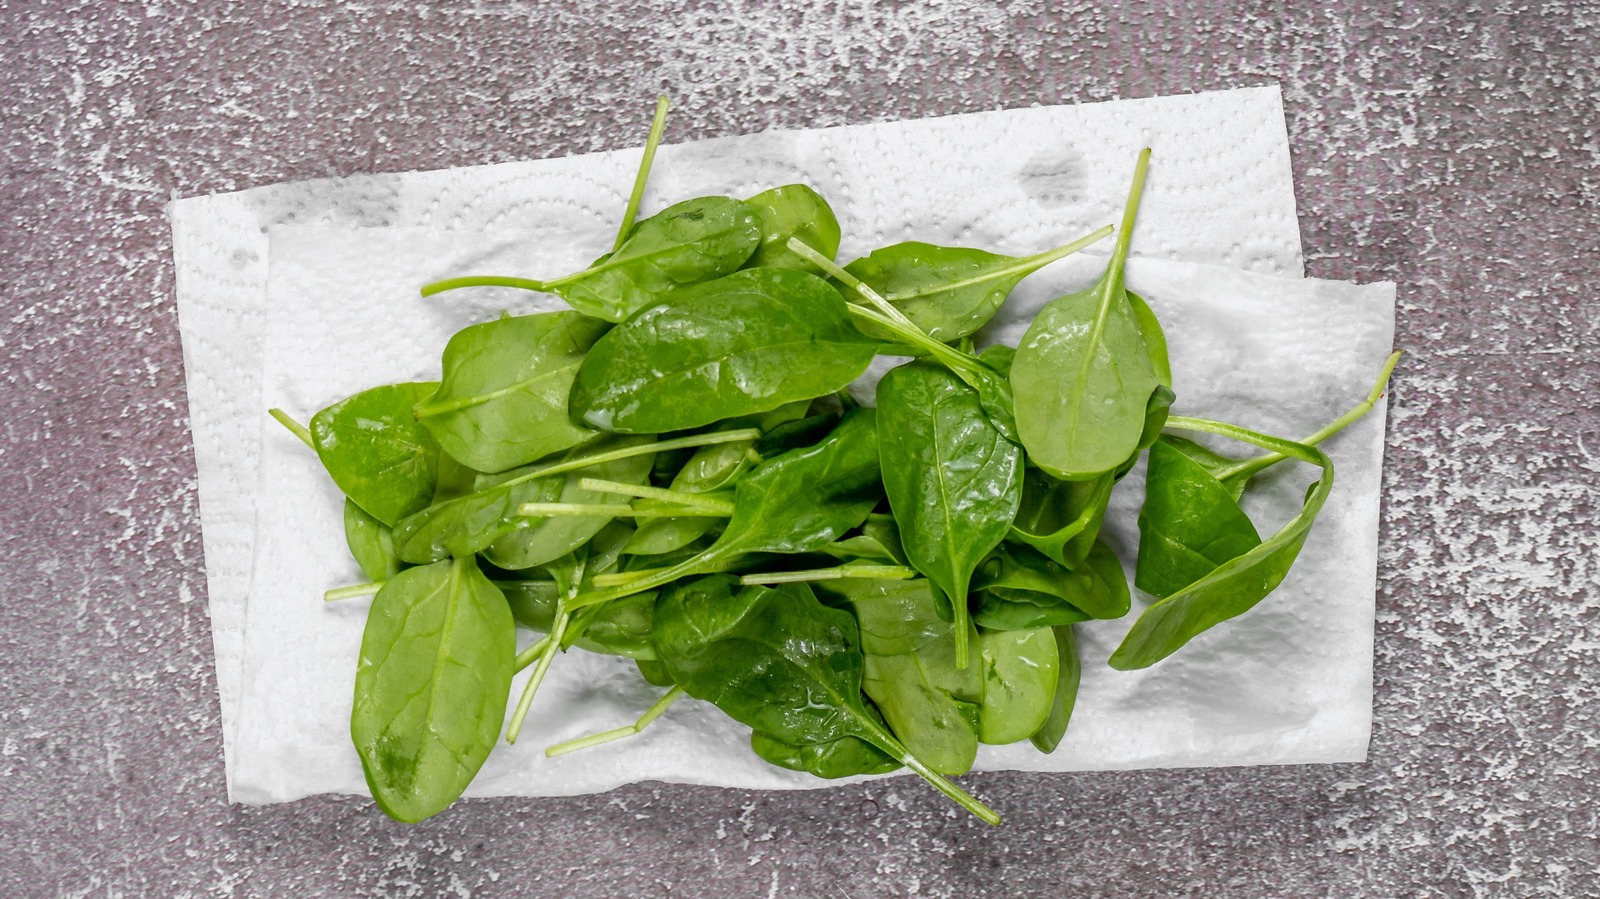 Paper towels are essential for storing spinach long term